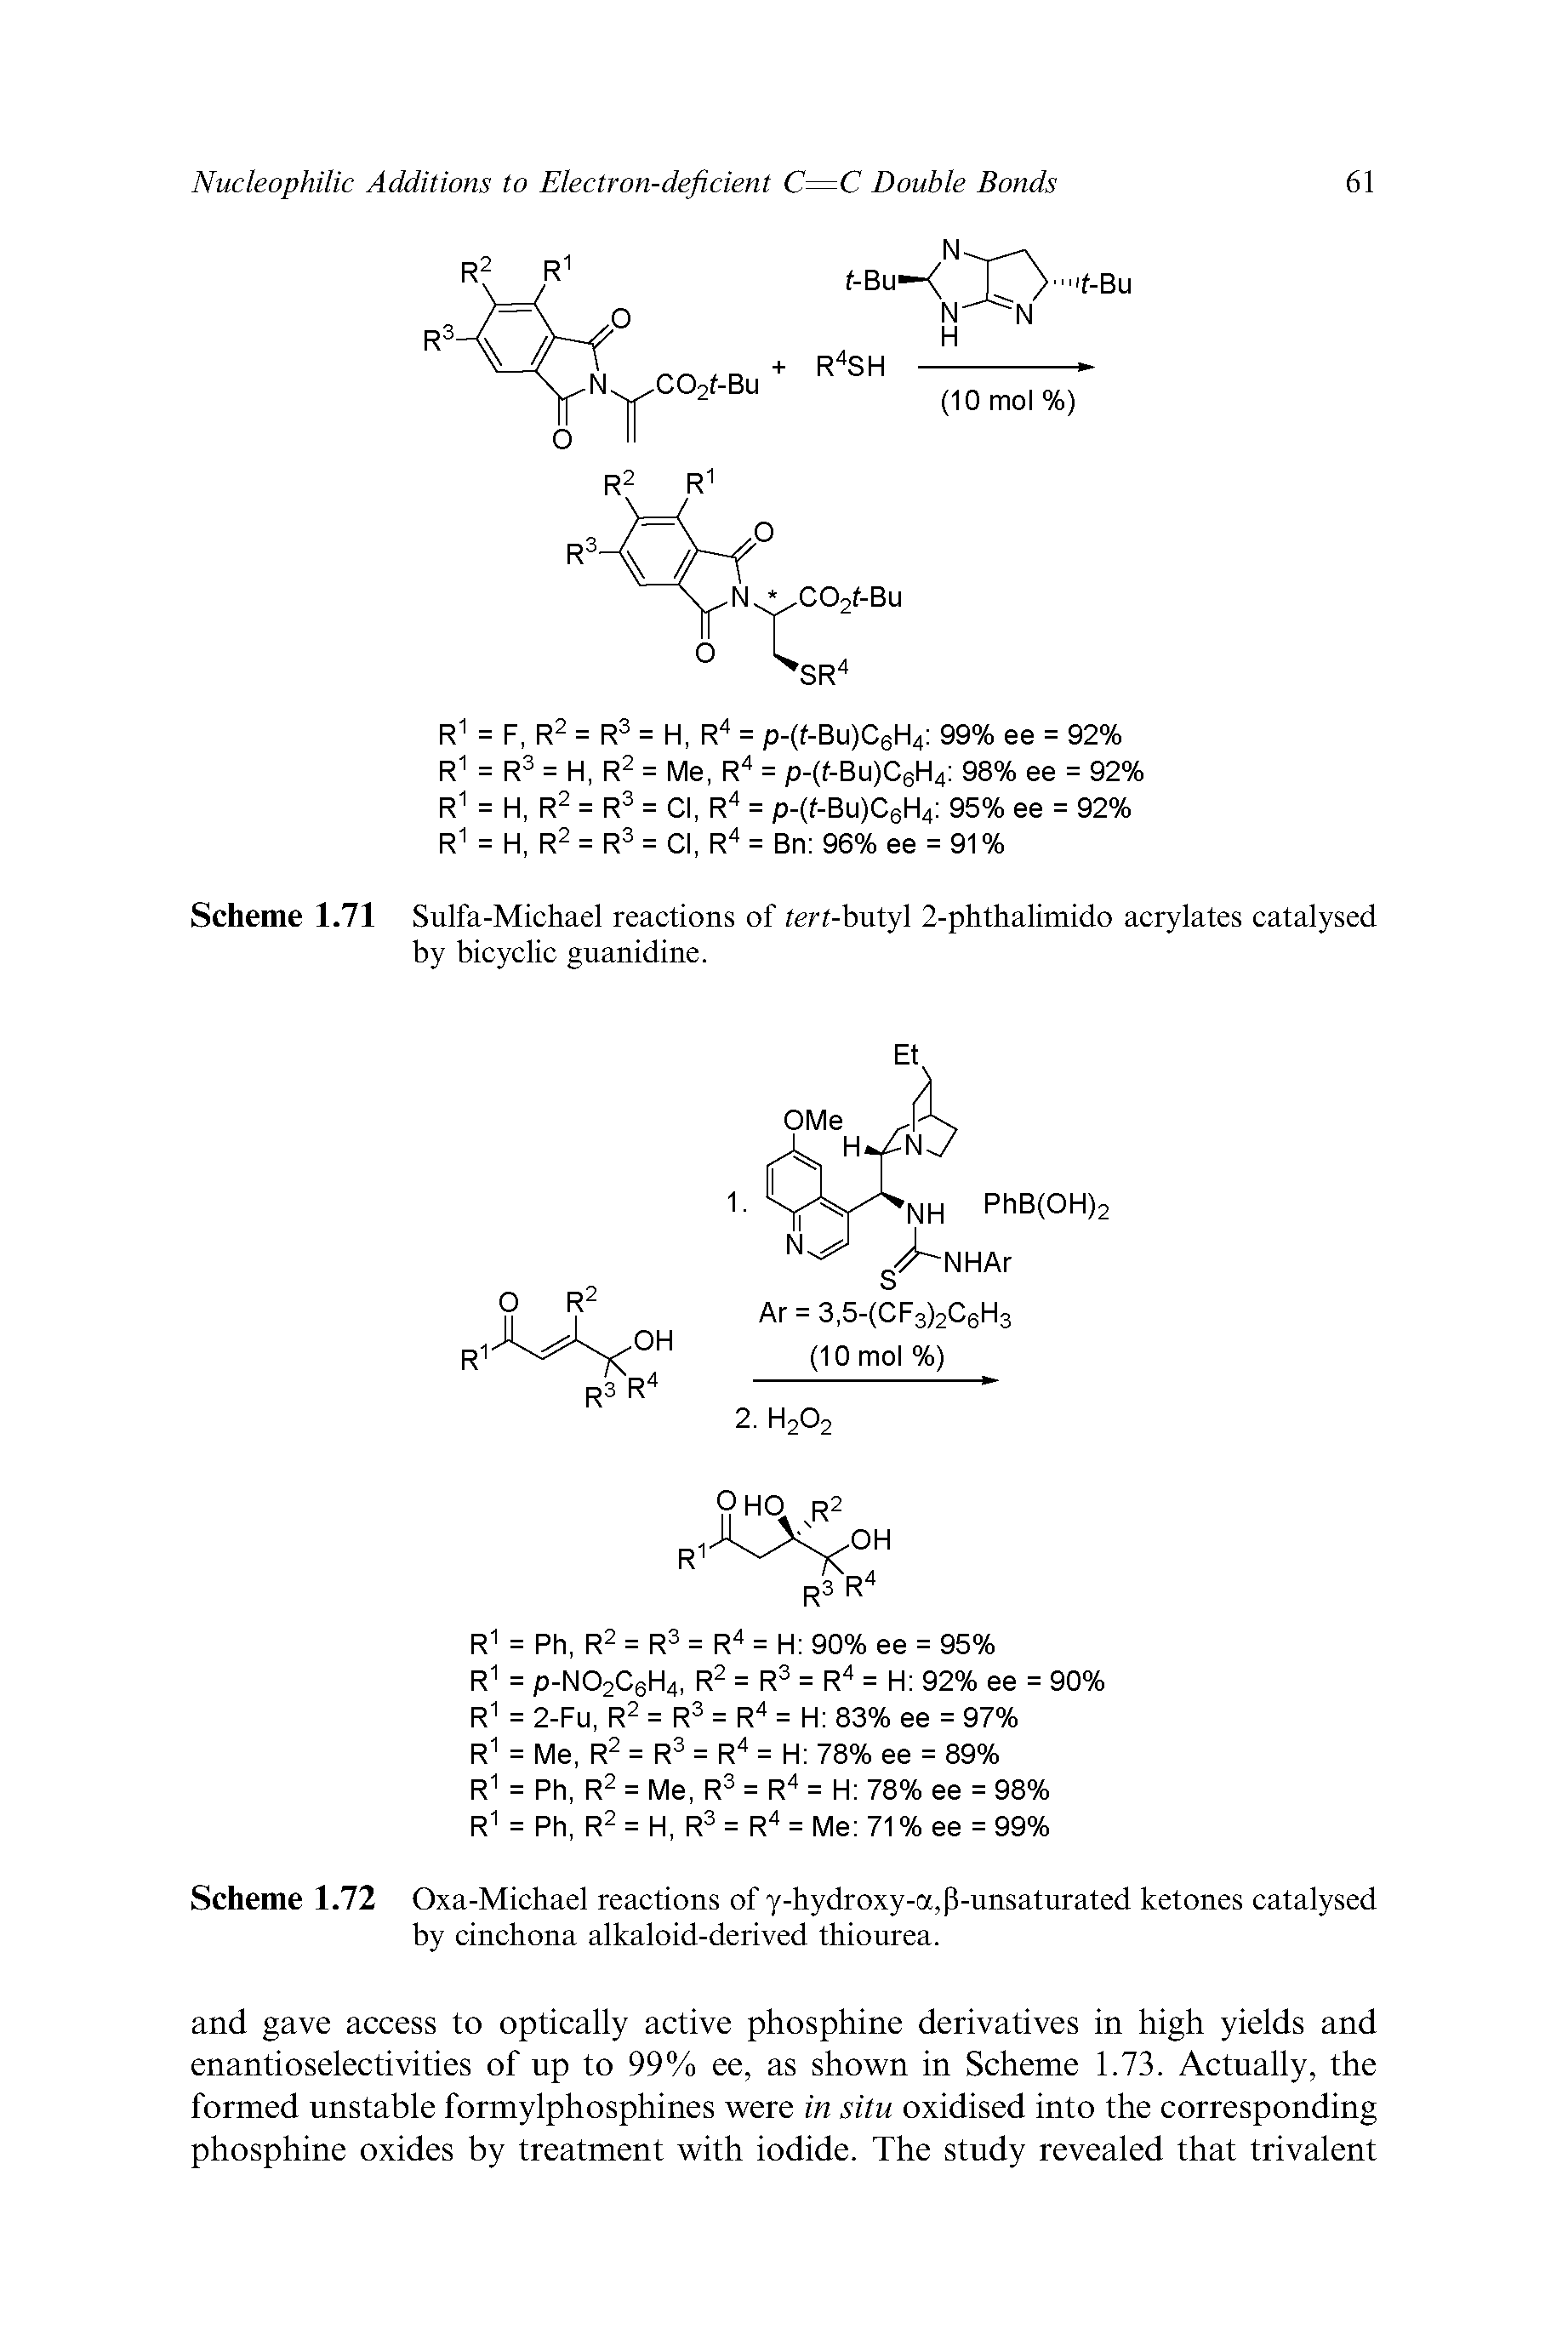 Scheme 1.72 Oxa-Michael reactions of y-hydroxy-a,P-unsaturated ketones catalysed by cinchona alkaloid-derived thiourea.